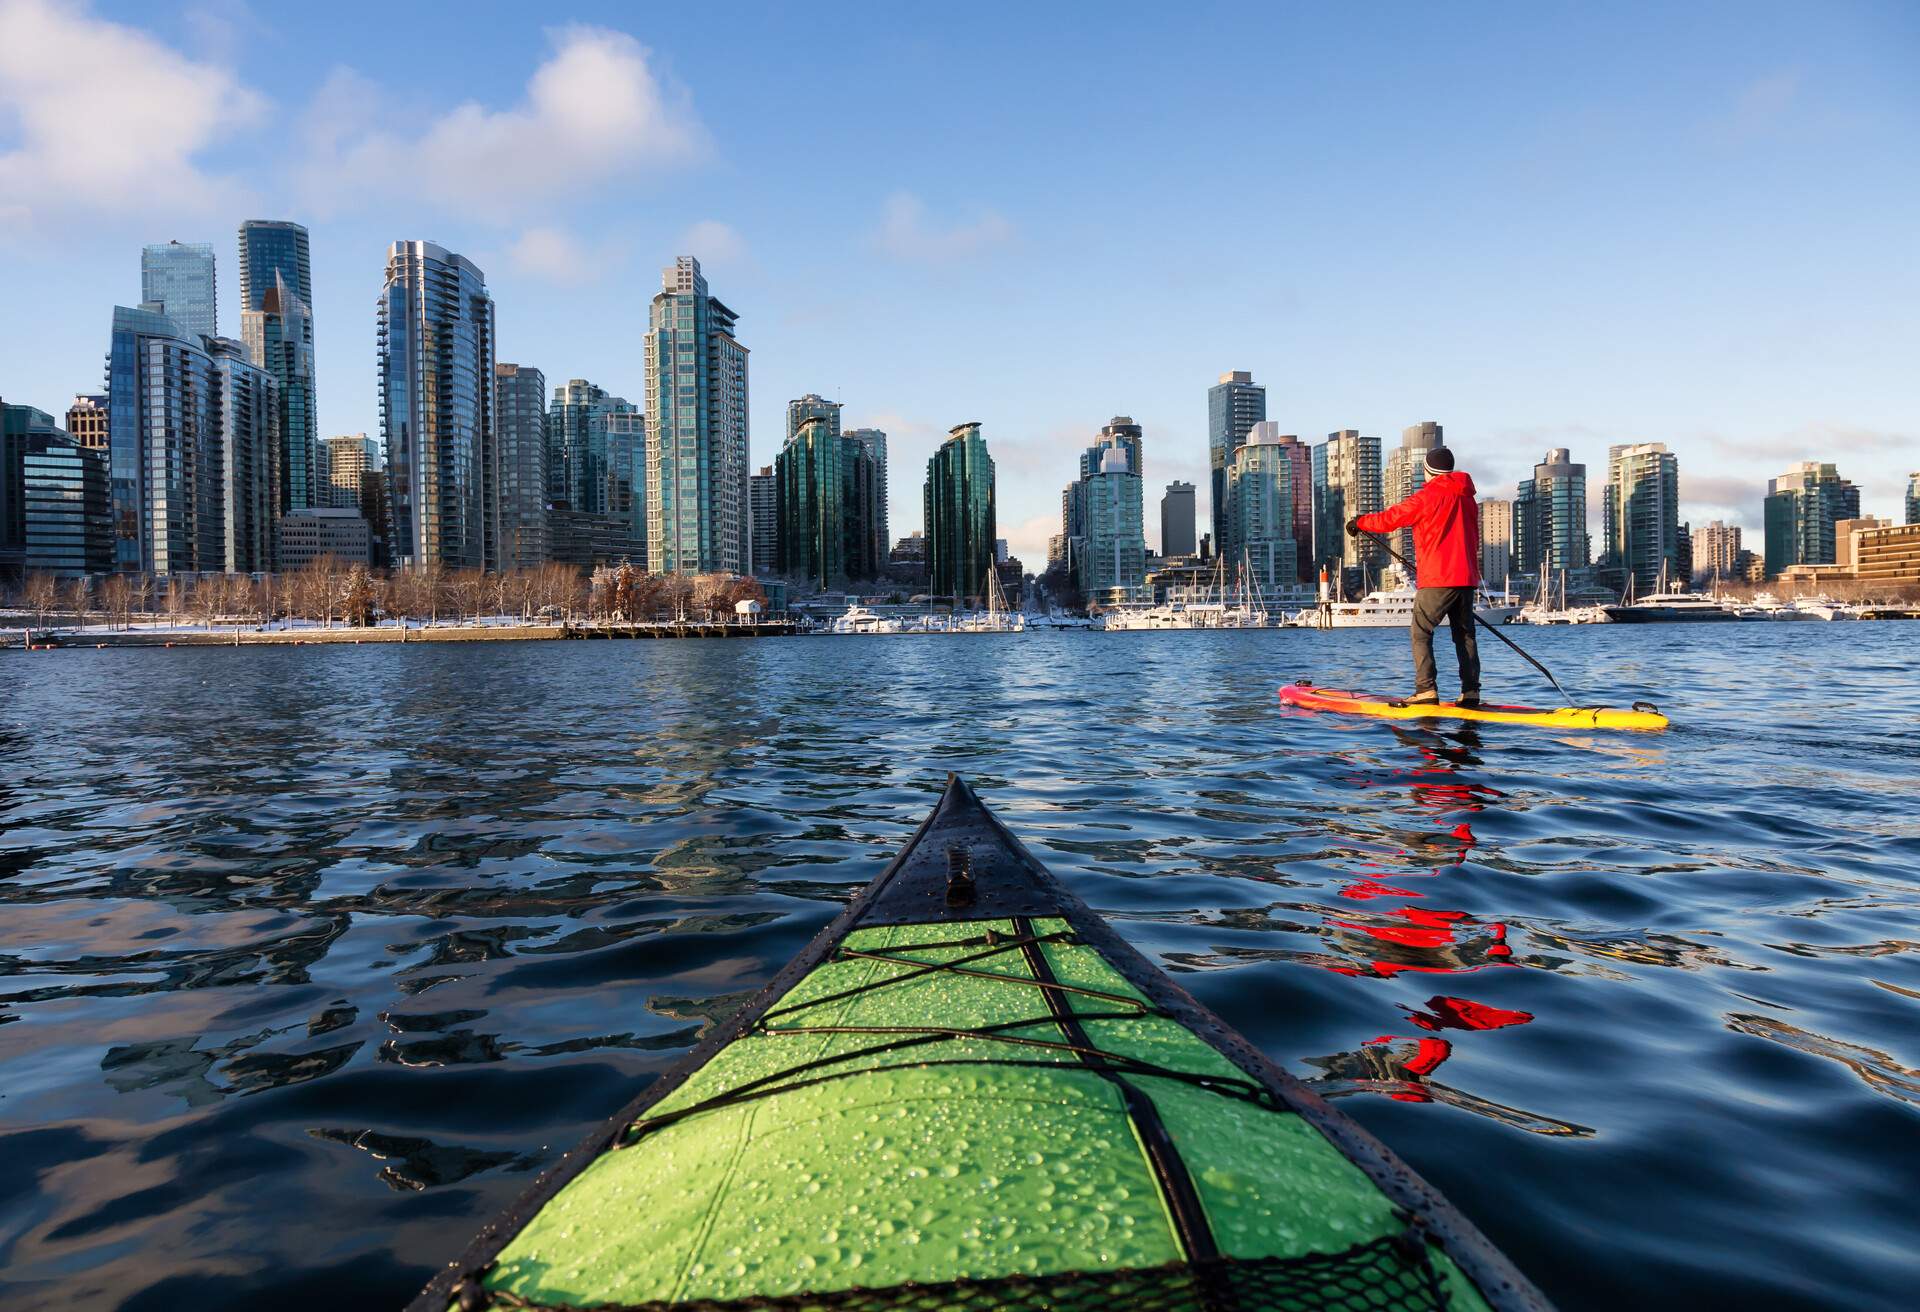 DEST_CANADA_VANCOUVER_Kayaking and Paddle Boarding in Coal Harbour _shutterstock-premier_1042397758